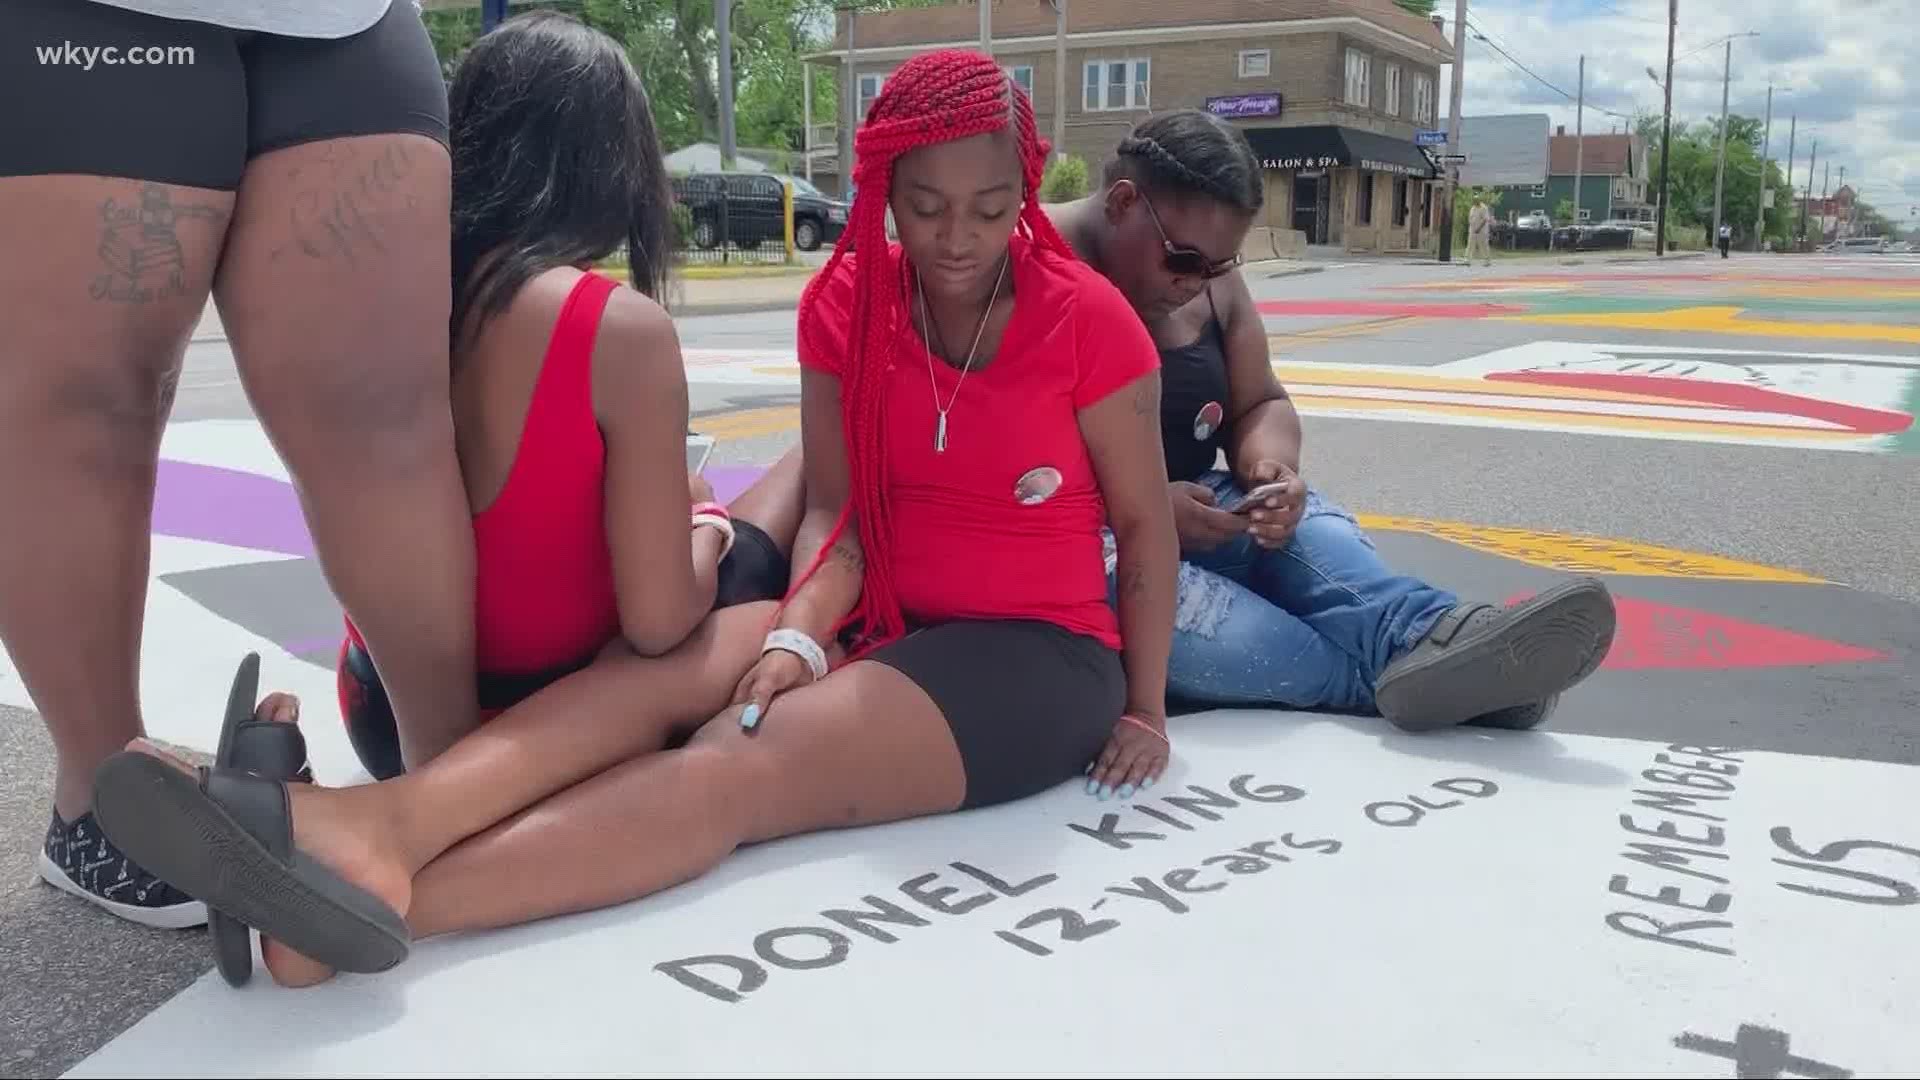 June 26, 2020: When Latasha Dotson visited the Black Lives Matter mural on Cleveland's East 93rd Street, she was touched by an unexpected element of the artwork.